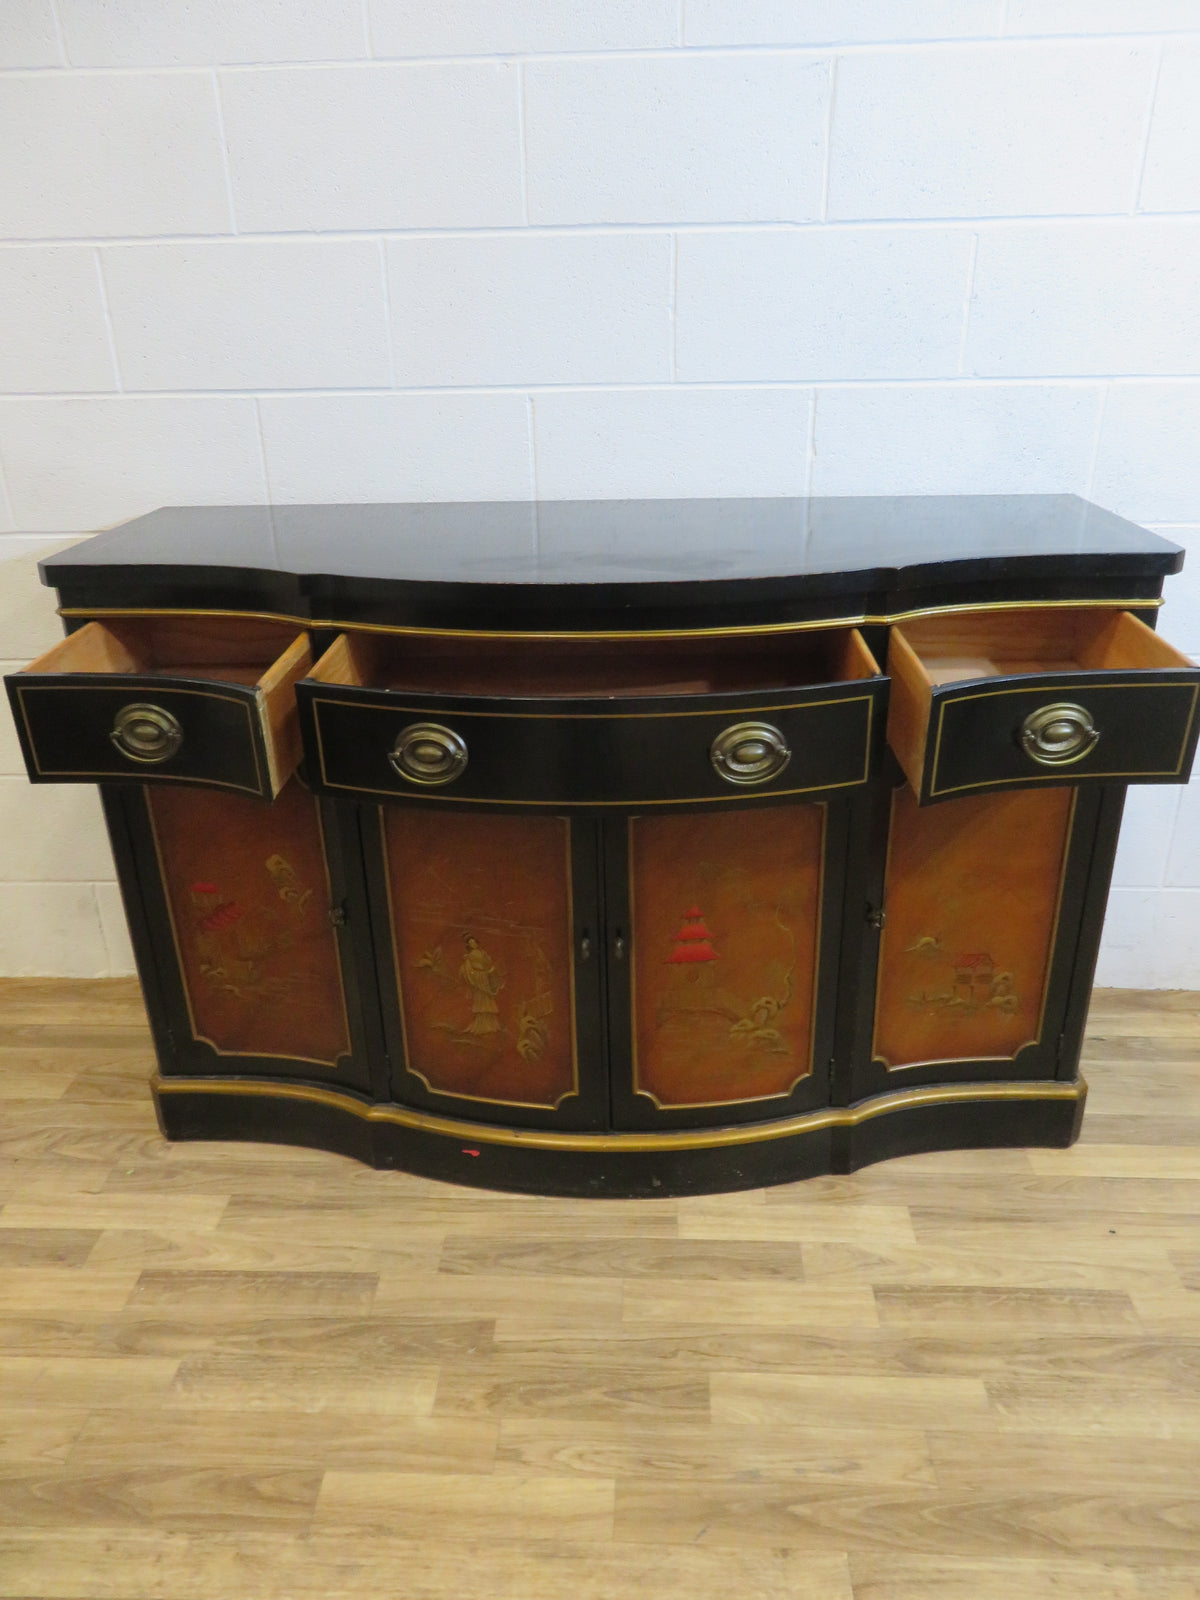 6-Drawer Dresser with Asian Theme